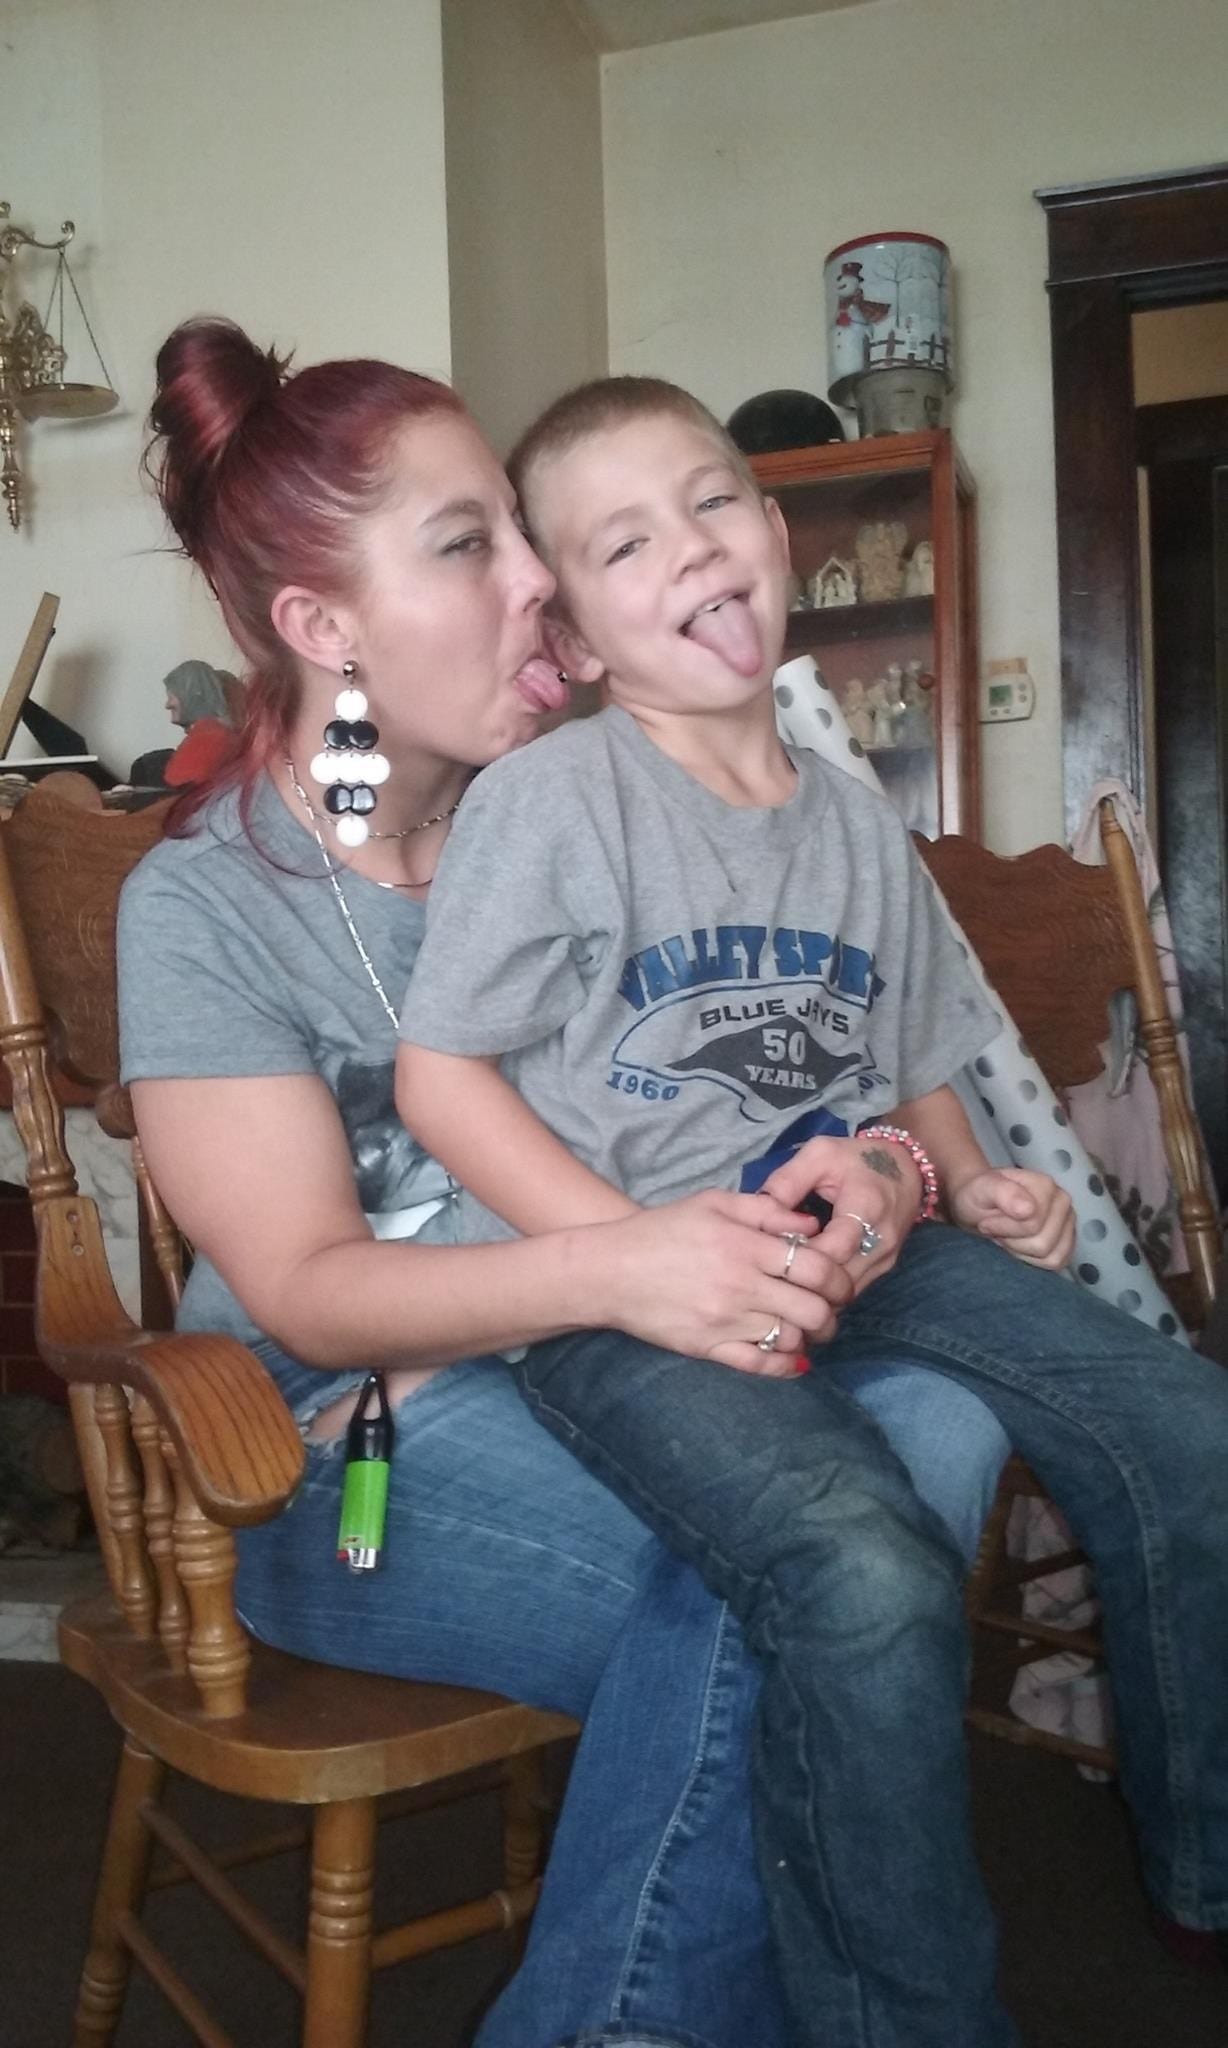 Candice Marie Wheat of New Albany jokes with her son in this family snapshot. Wheat, 30, died in the Clark County Jail in 2016.